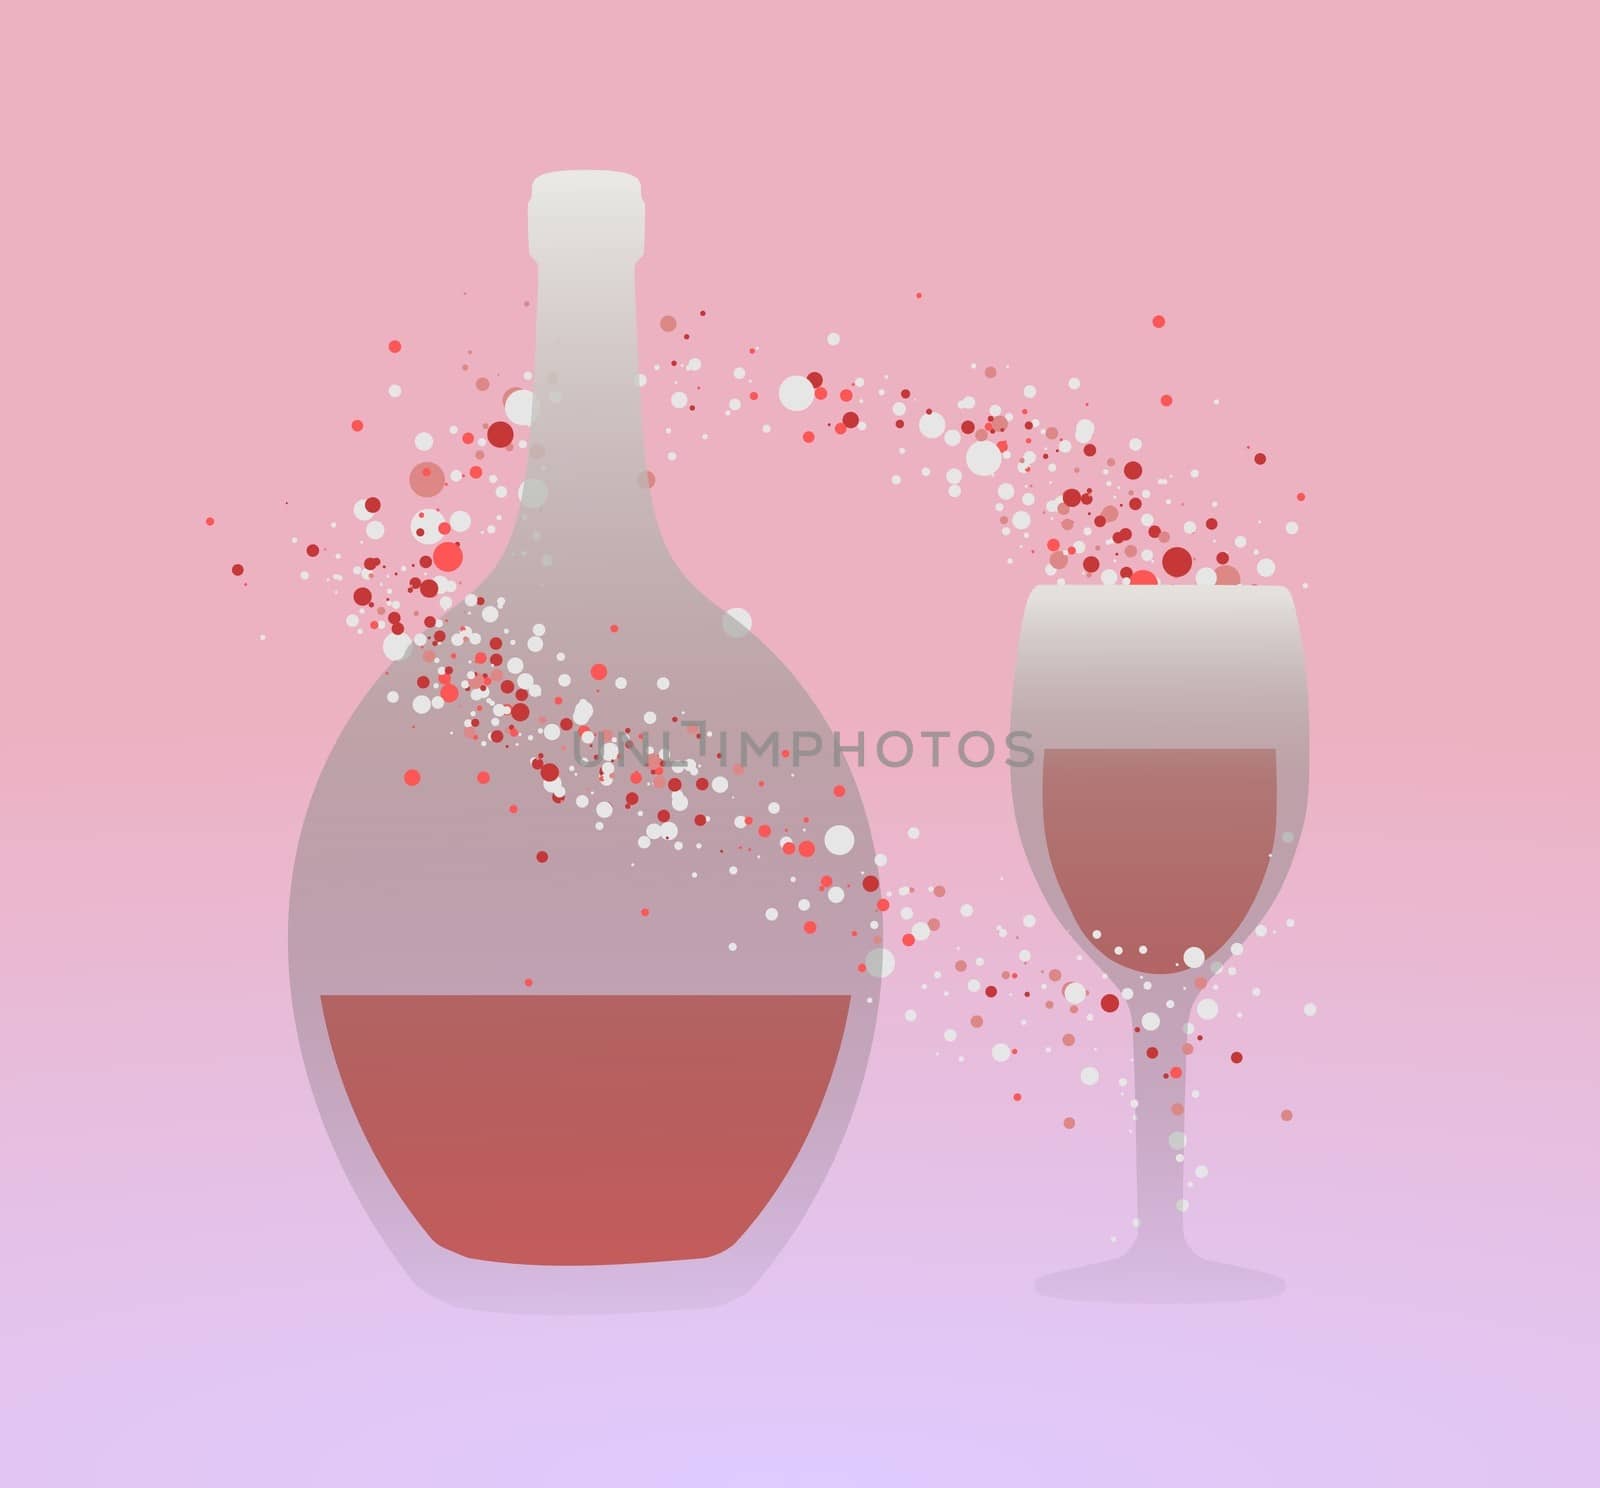 Illustration of a bottle of wine, glass and bubbles